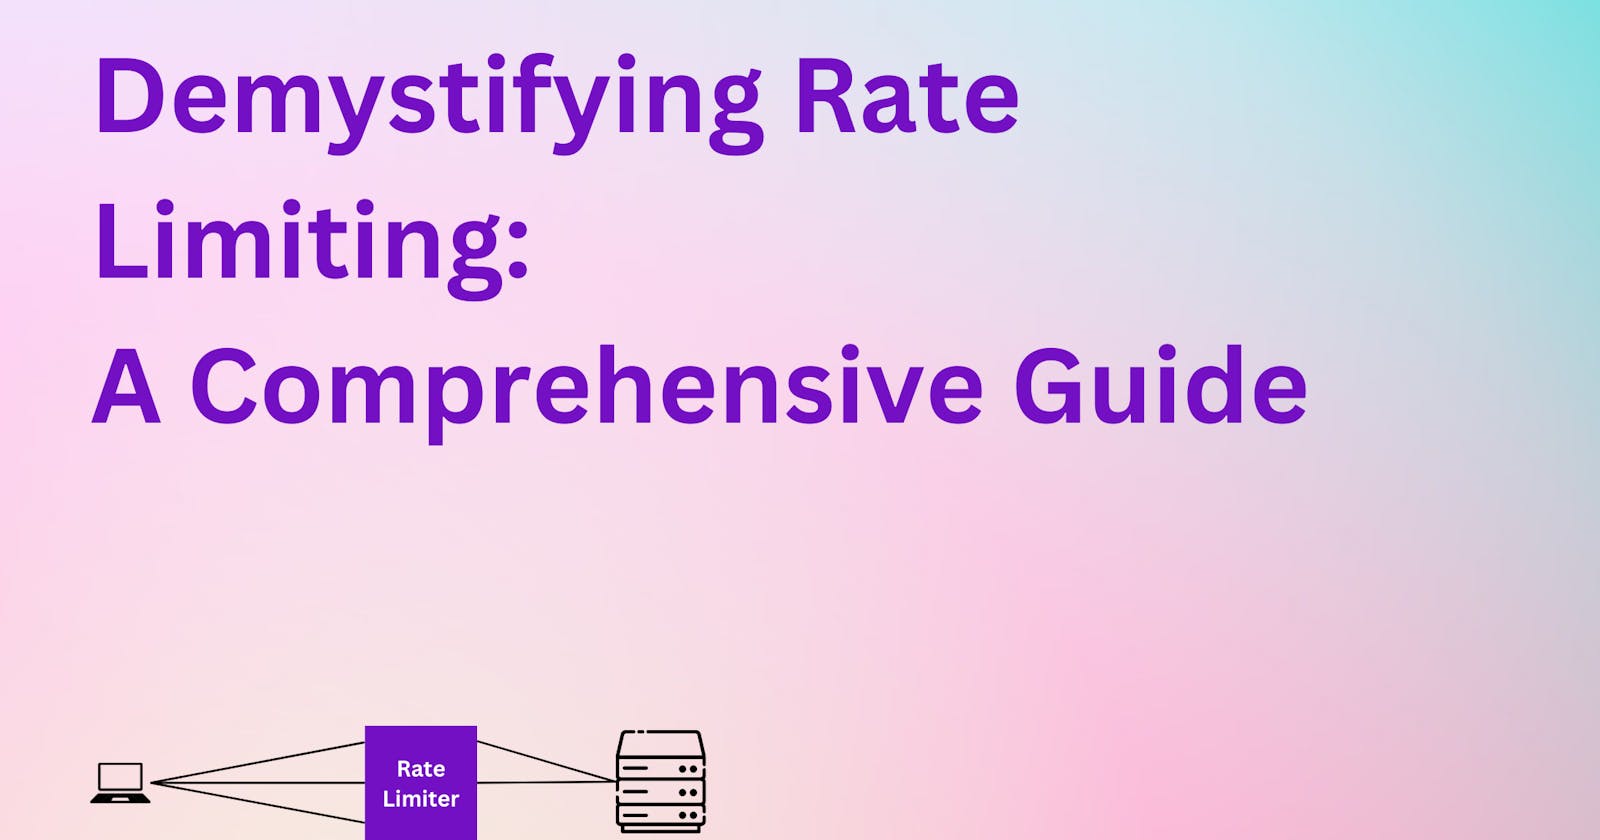 Demystifying Rate Limiting: A Comprehensive Guide